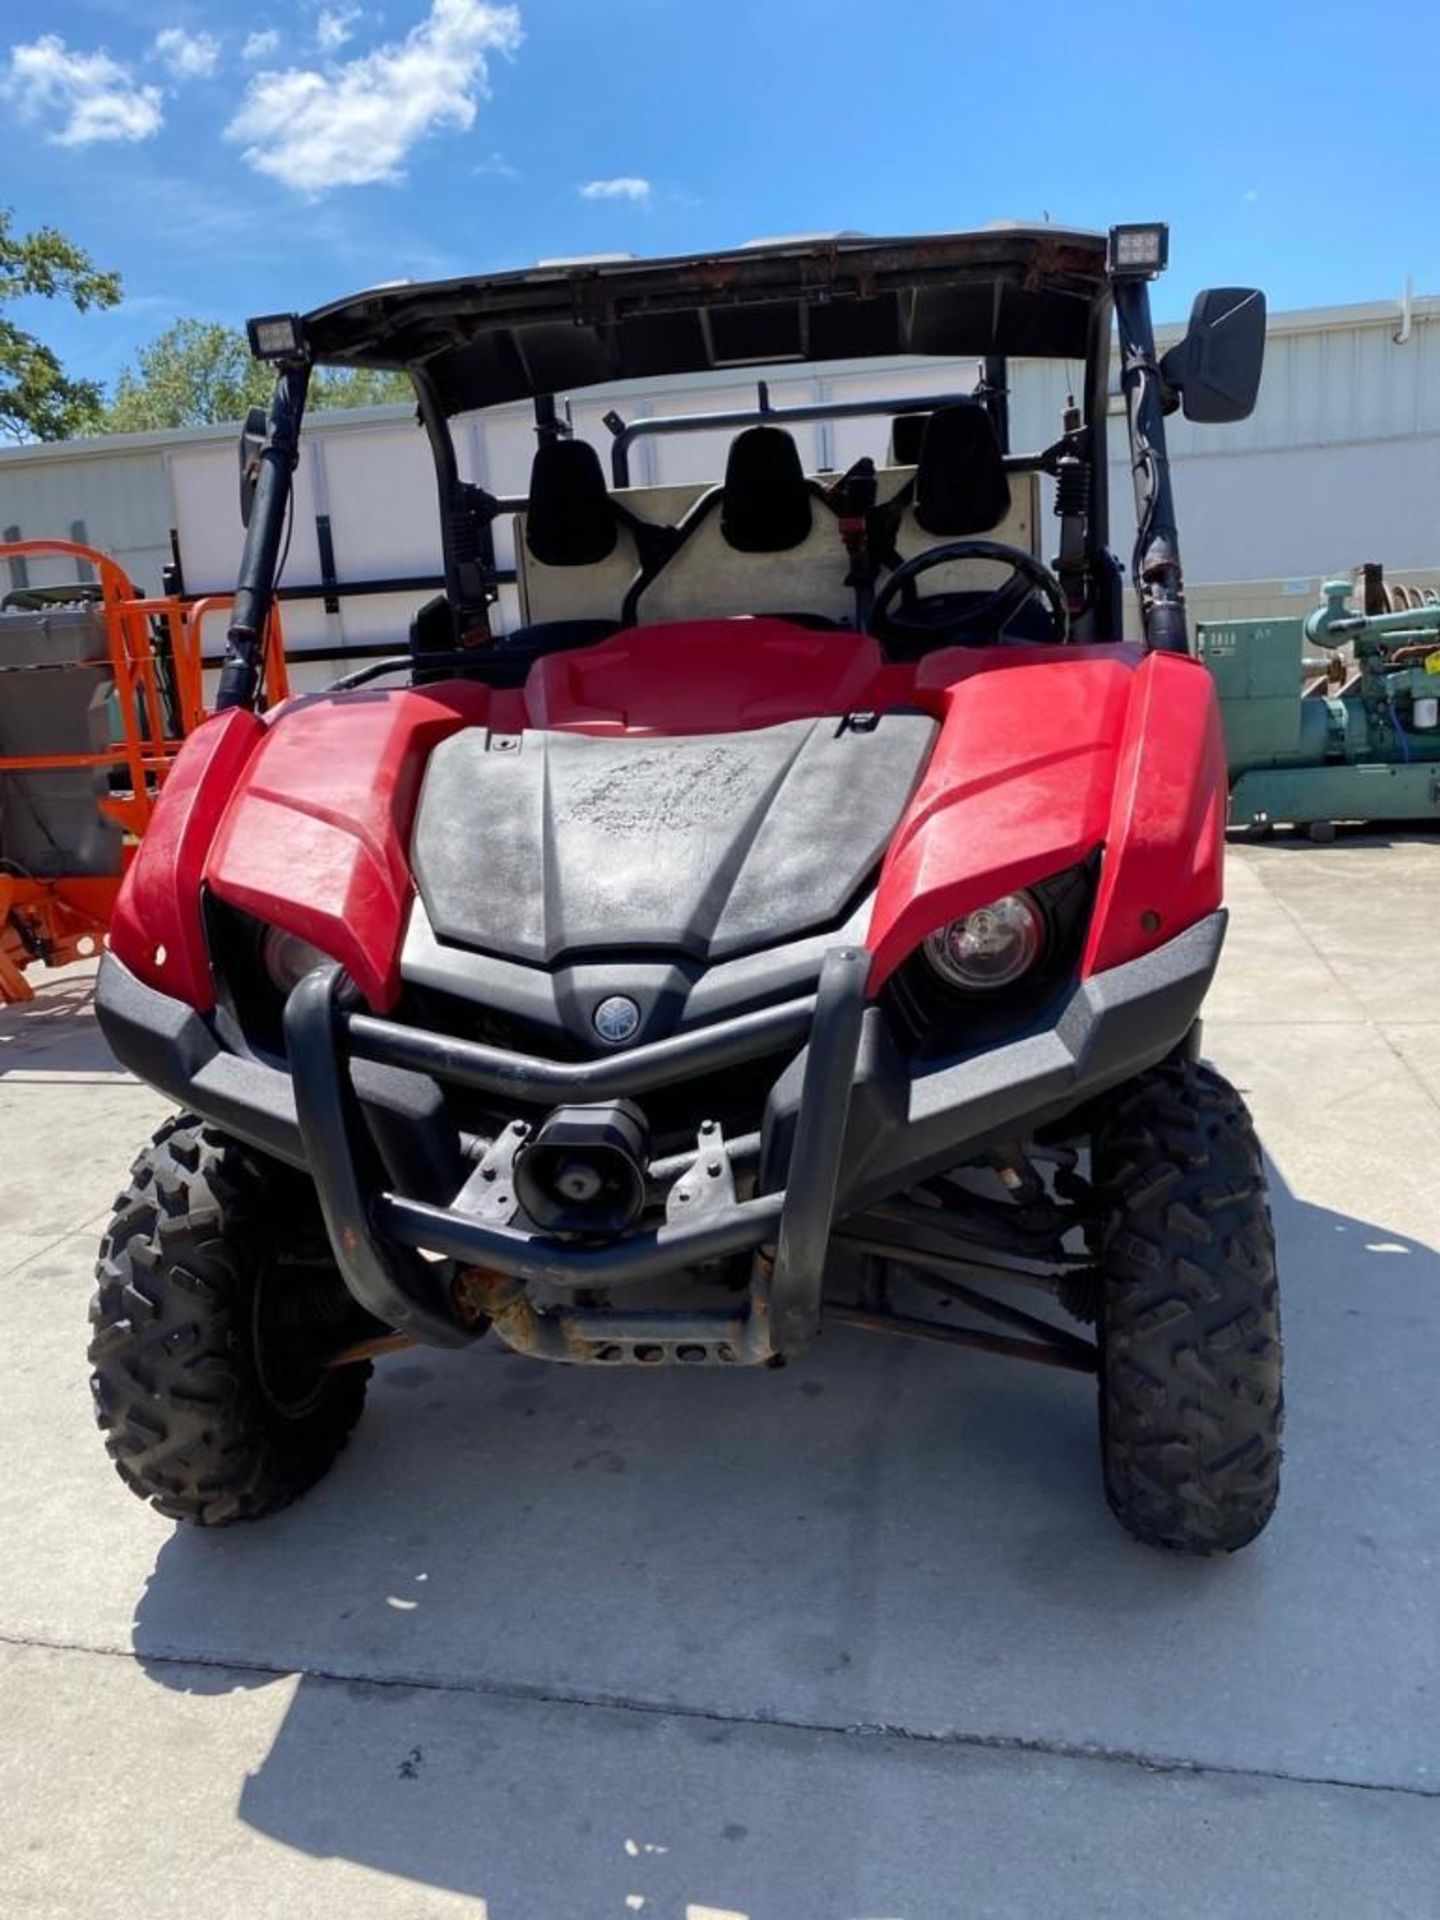 YAMAHA UTV WITH TOOL/STORAGE BIN, HAS RUST ON UNDER CARRIAGE AND FRAME, RUNS AND OPERATES - Image 3 of 20